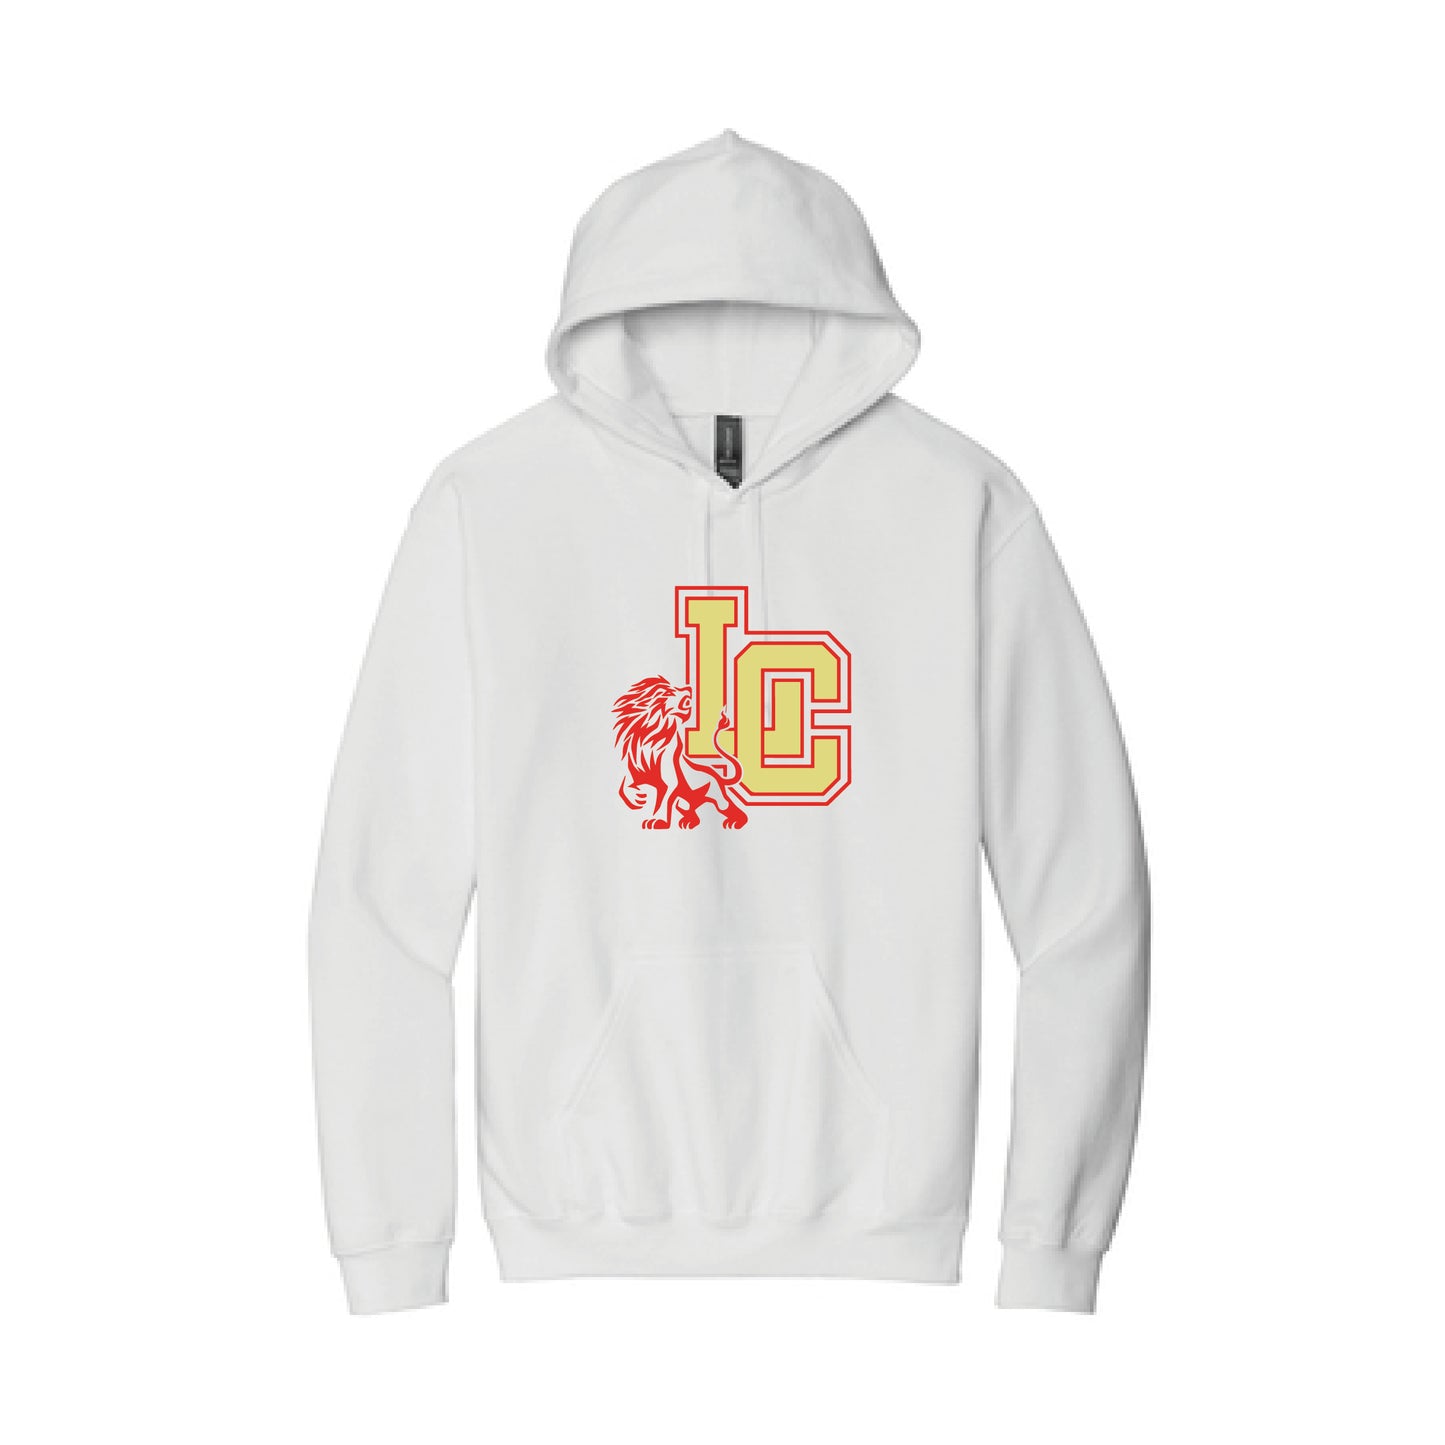 Softstyle Pullover Hooded Sweatshirt